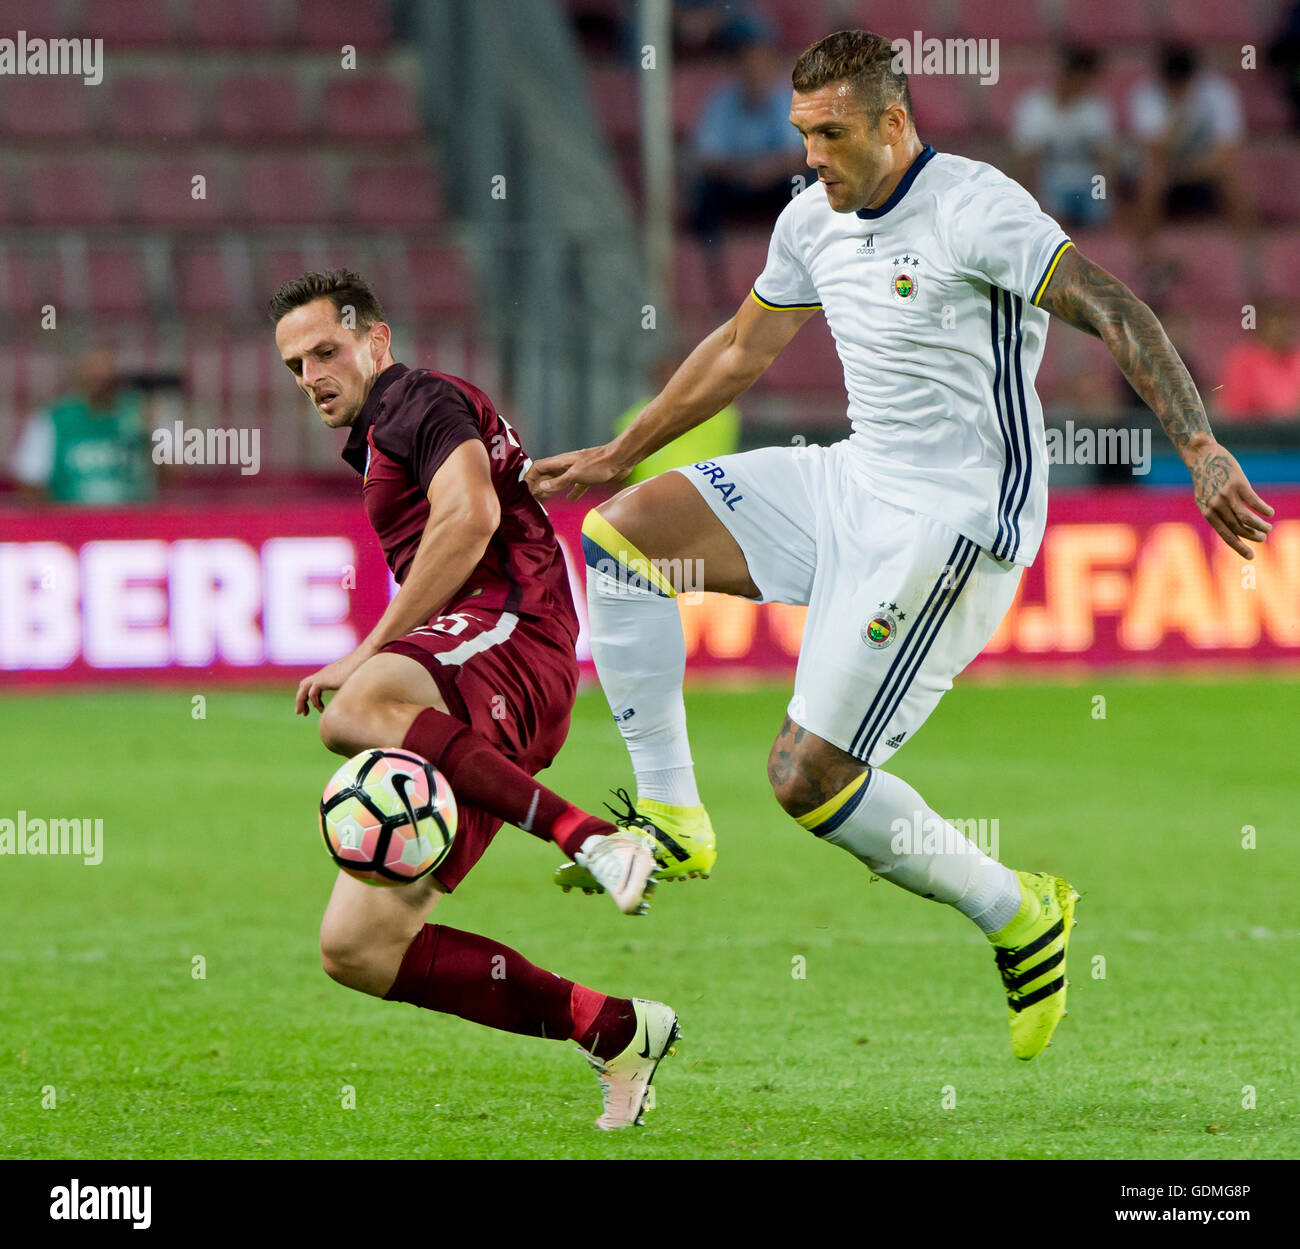 Prague, Czech Republic. 19th July, 2016. Mario Holek of Sparta, left, and Jose Fernandao of Fenerbahce in action during a friendly soccer match between AC Sparta Praha vs Fenerbahce Istanbul, in Prague, Czech Republic, July 19, 2016. © Vit Simanek/CTK Pho Stock Photo